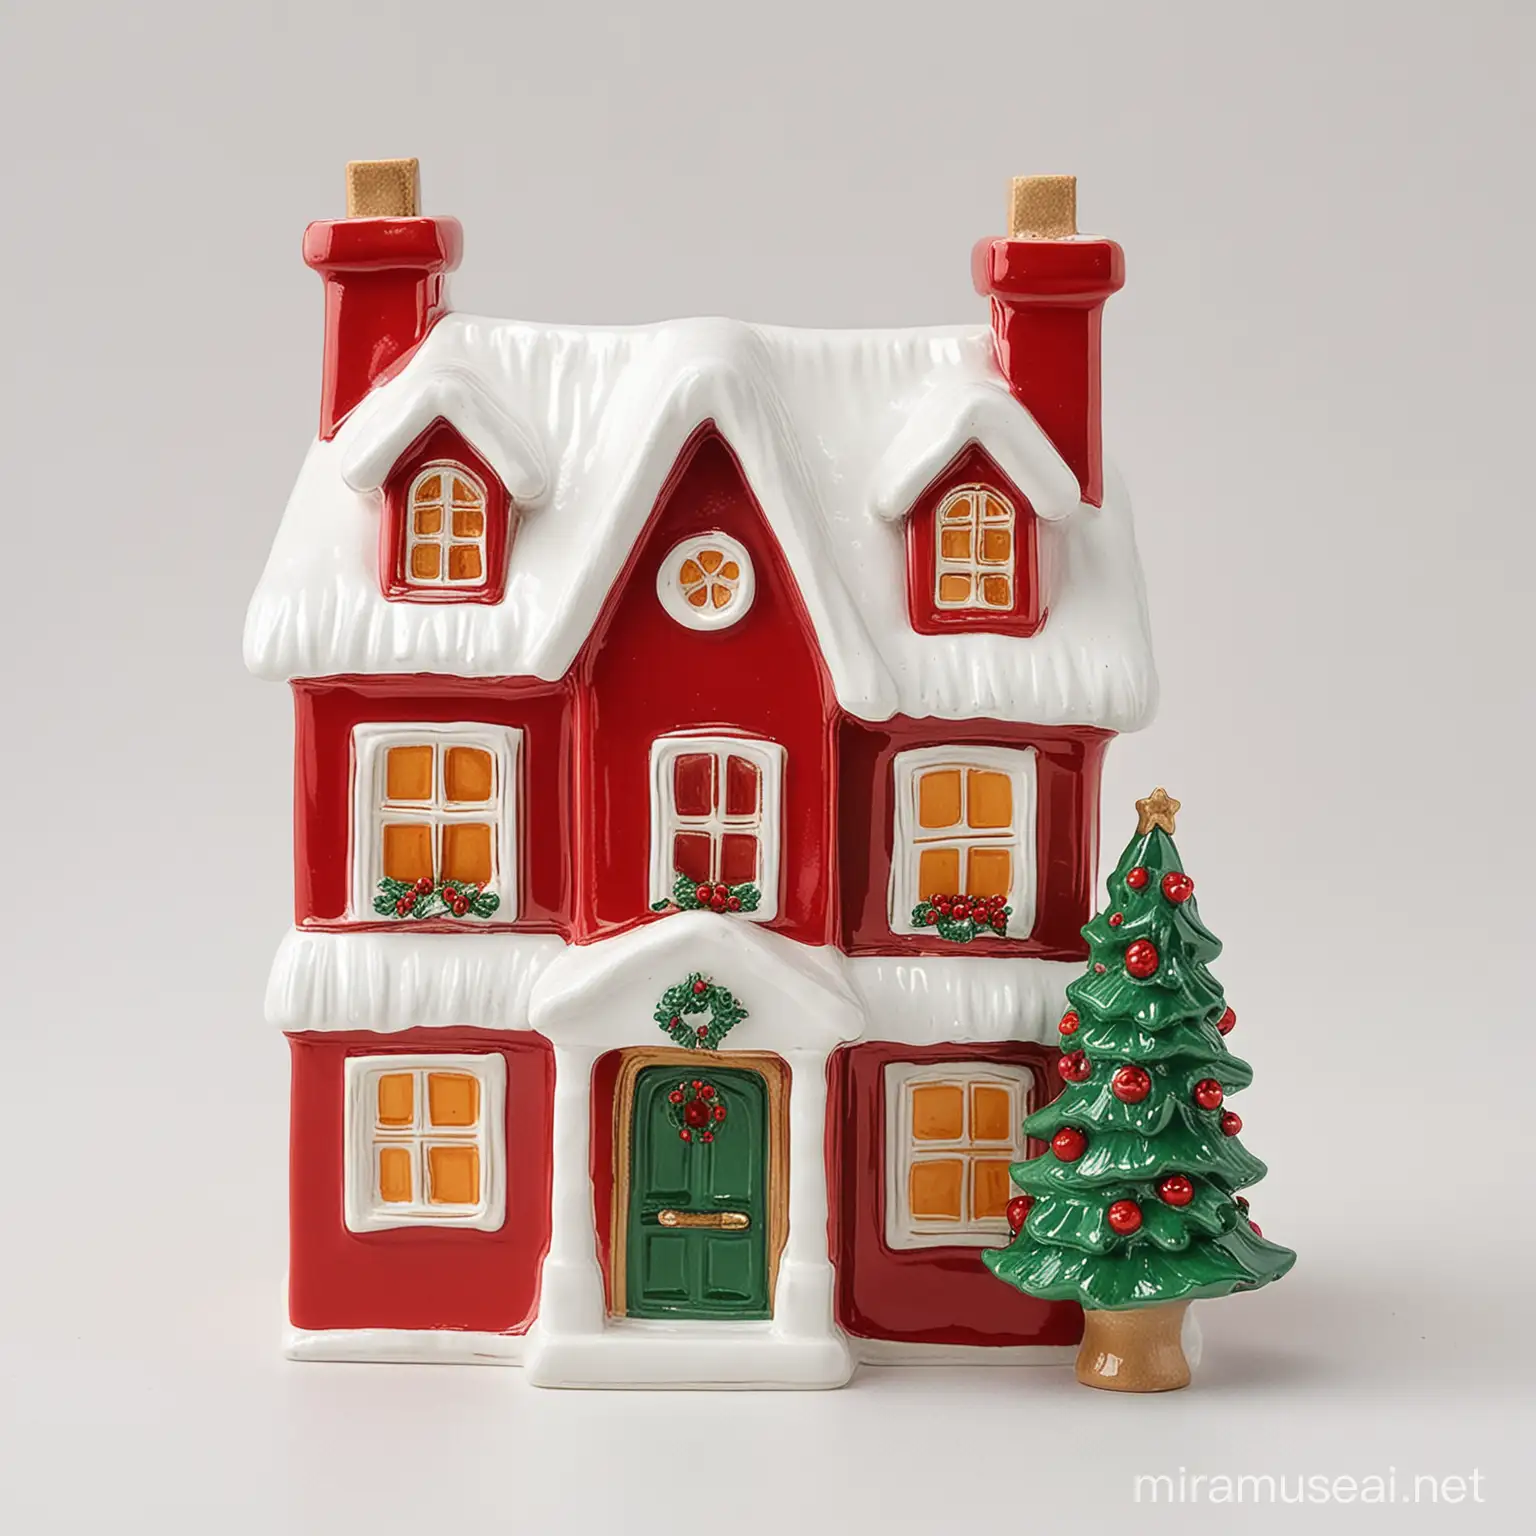 Festive Red and Green Ceramic Christmas House on White Background